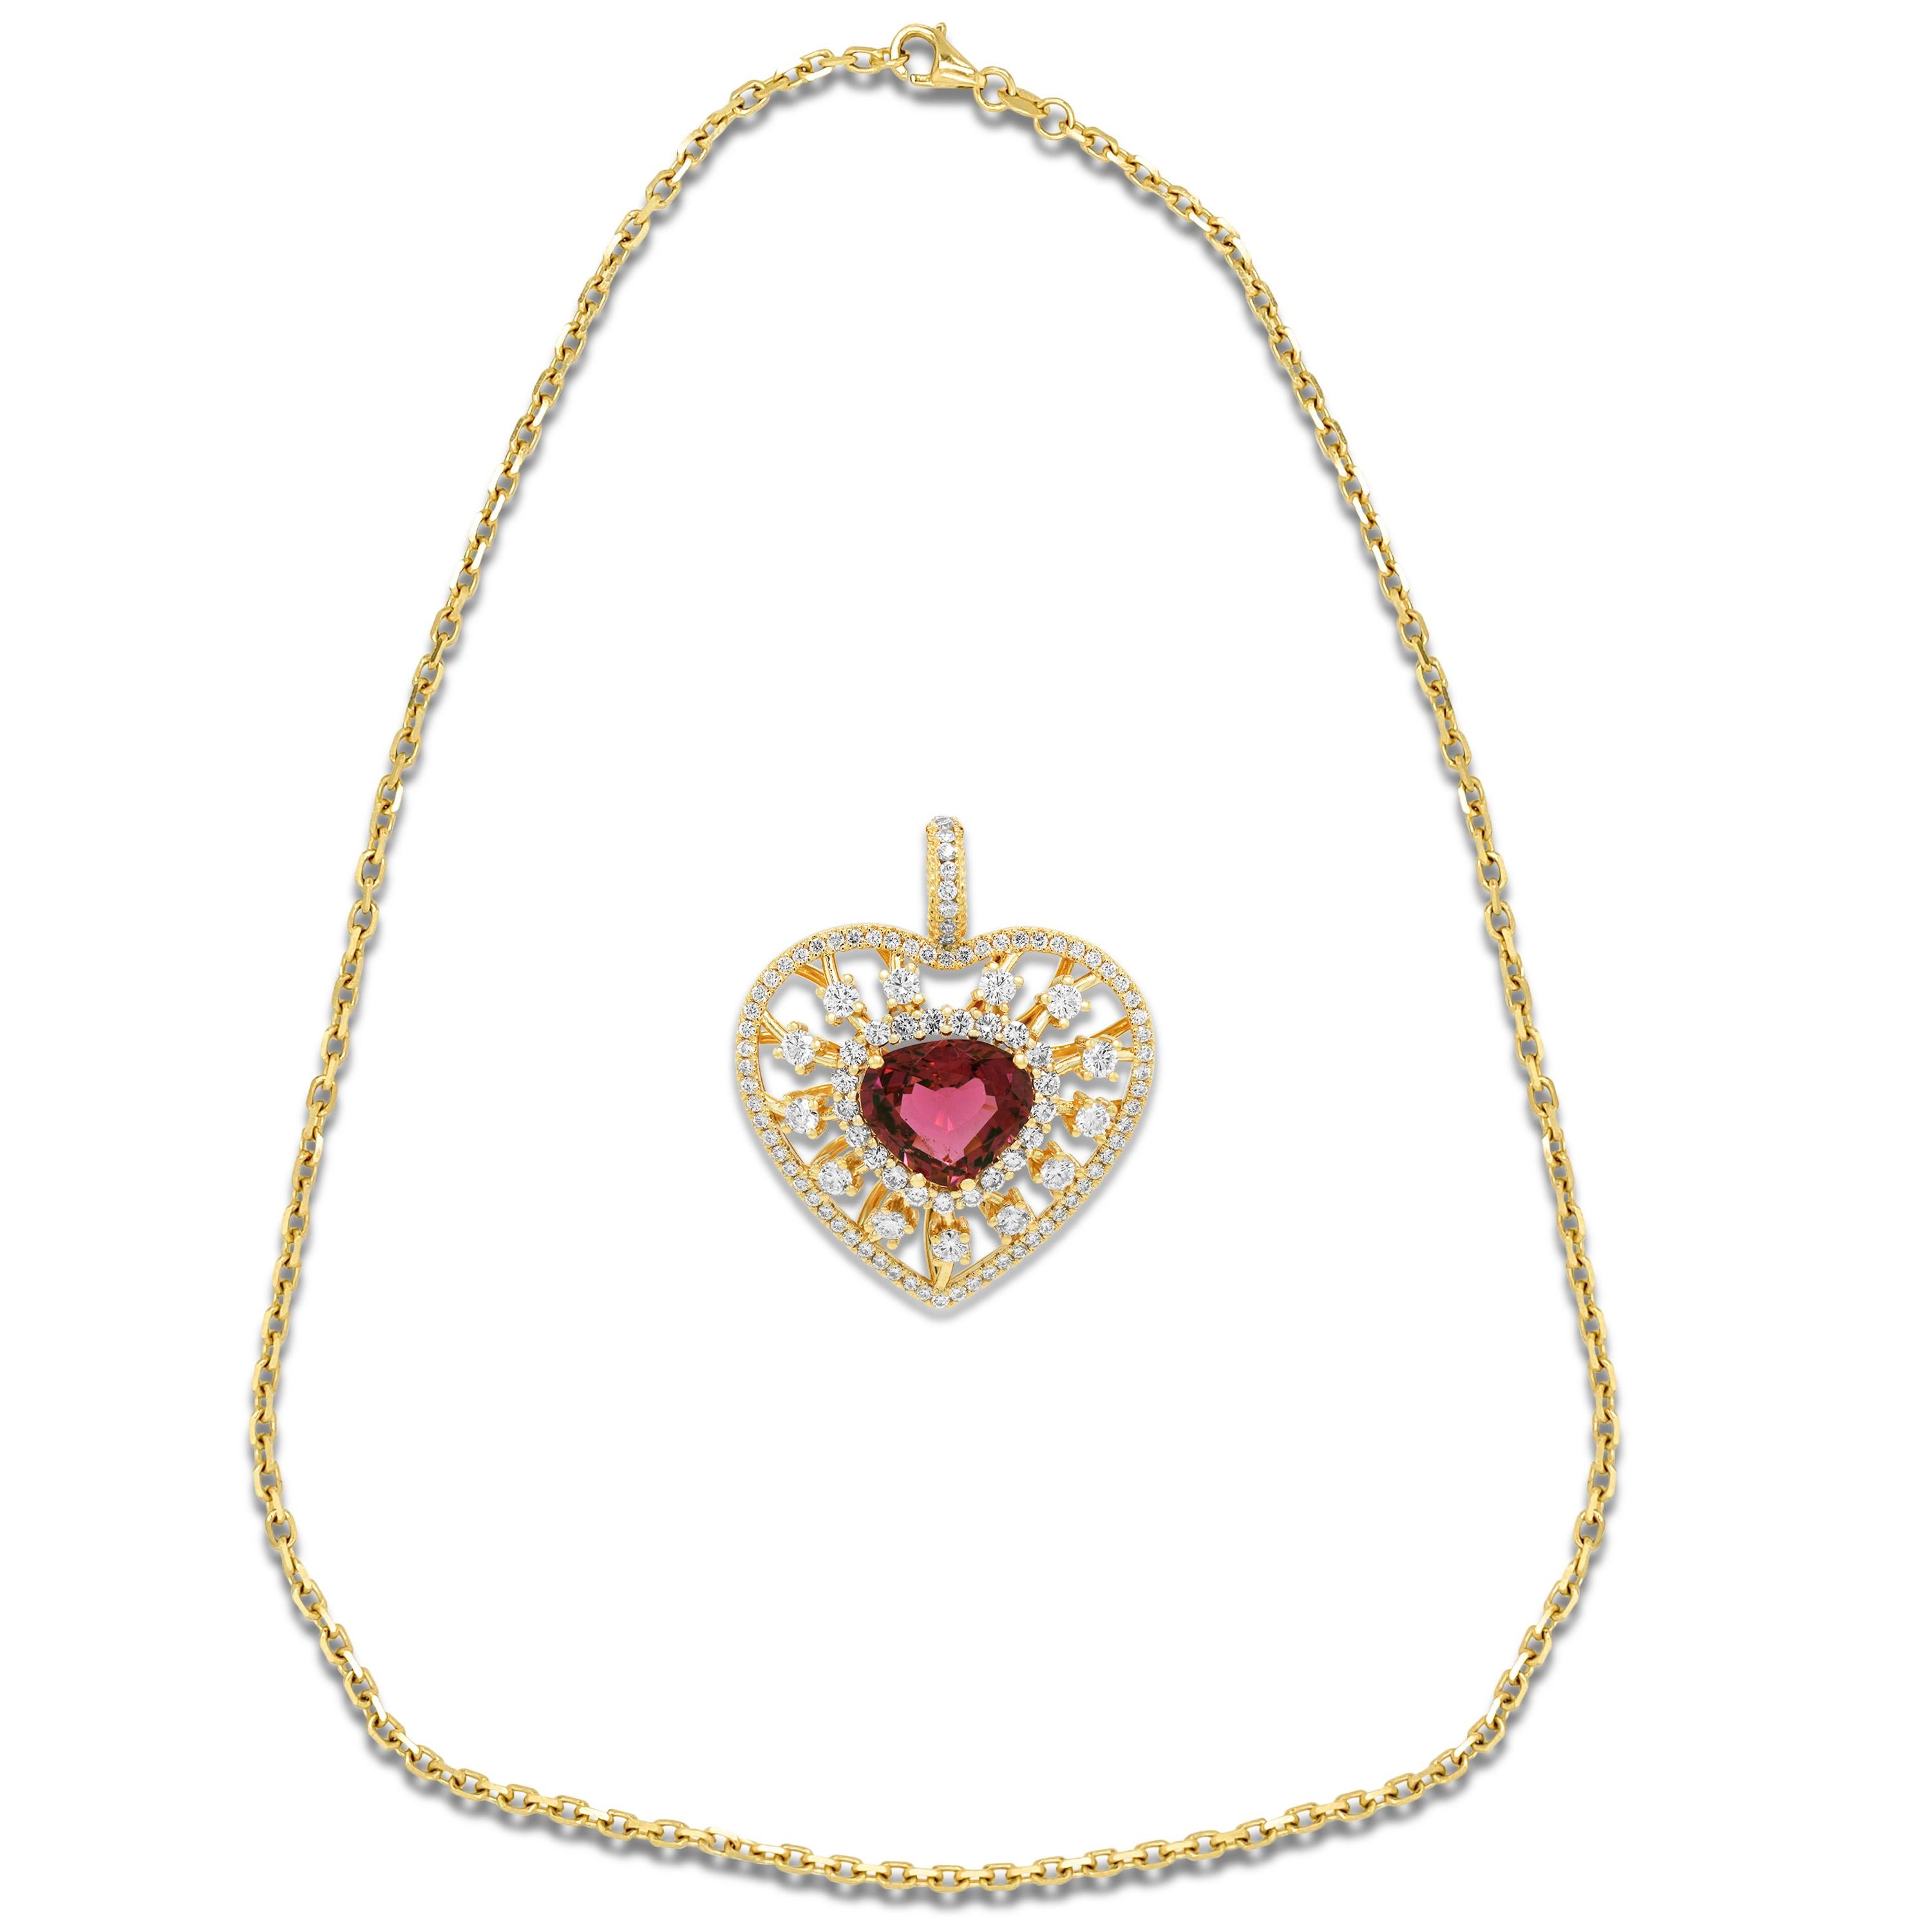 18K Yellow Gold Diamond Red Tourmaline Heart Enhancer Pendant Chain Necklace

This one-of-a-kind necklace showcases a heart-shape, red tourmaline center surrounded with diamonds. Made entirely in solid 18k gold.

5.24 carat Tourmaline center.

3.80